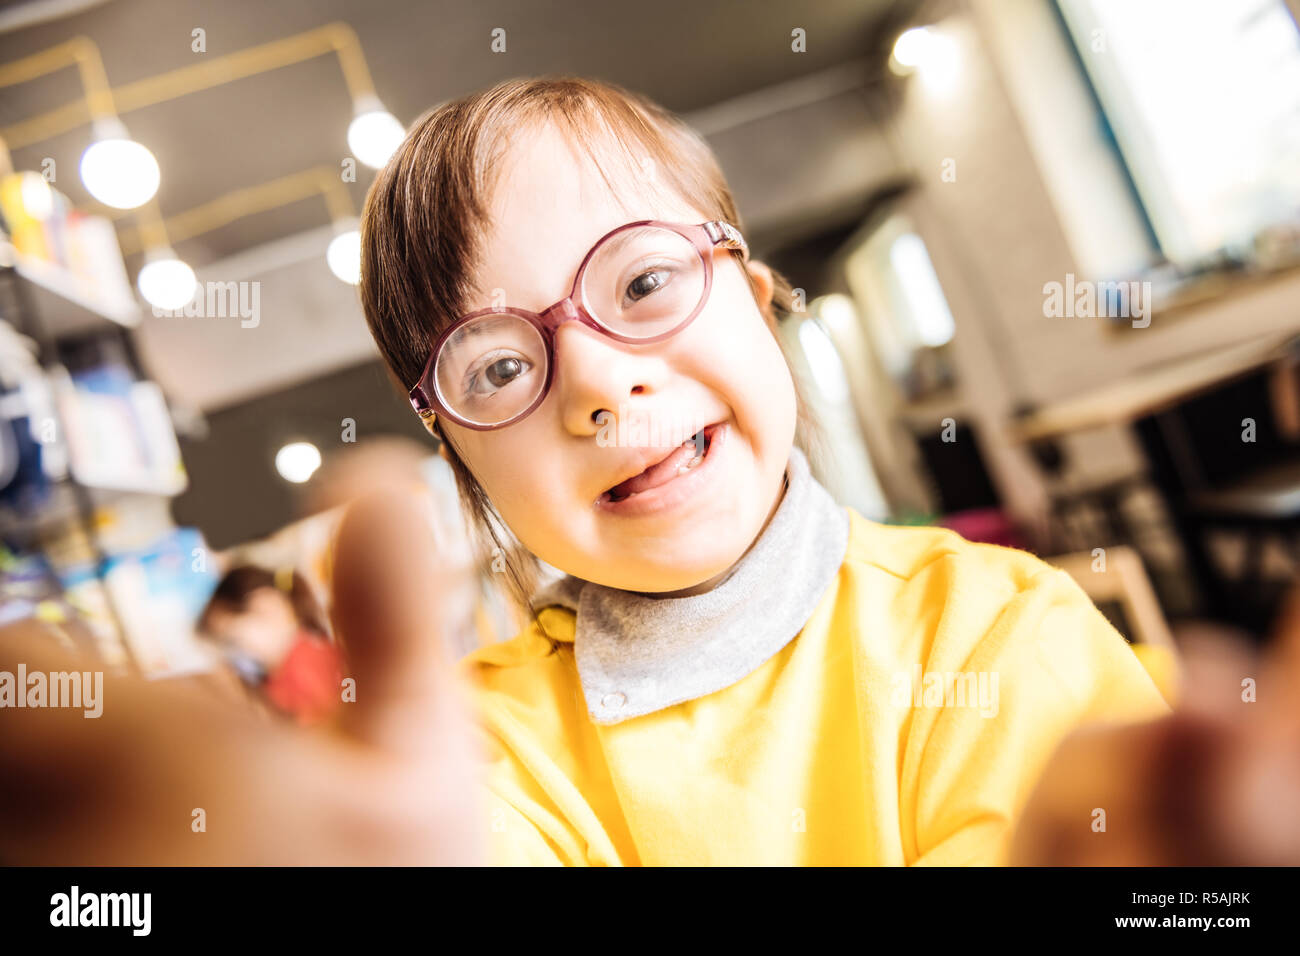 Yellow sweater. Close up of pleasant cute girl with Down syndrome wearing bright yellow sweater Stock Photo